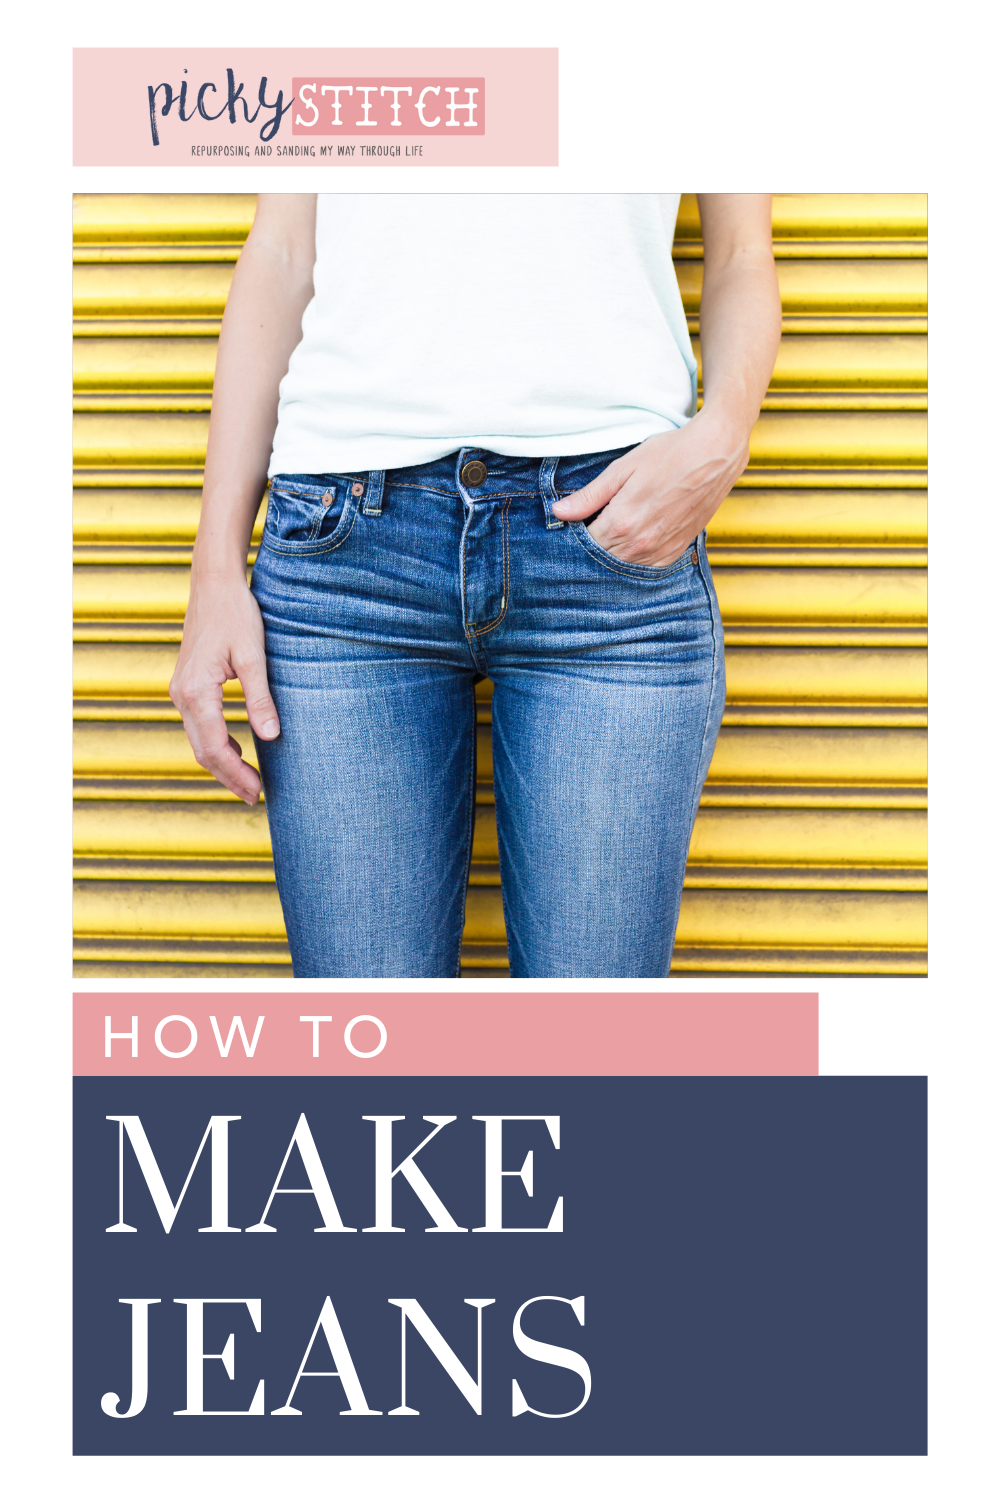 How to Make Jeans